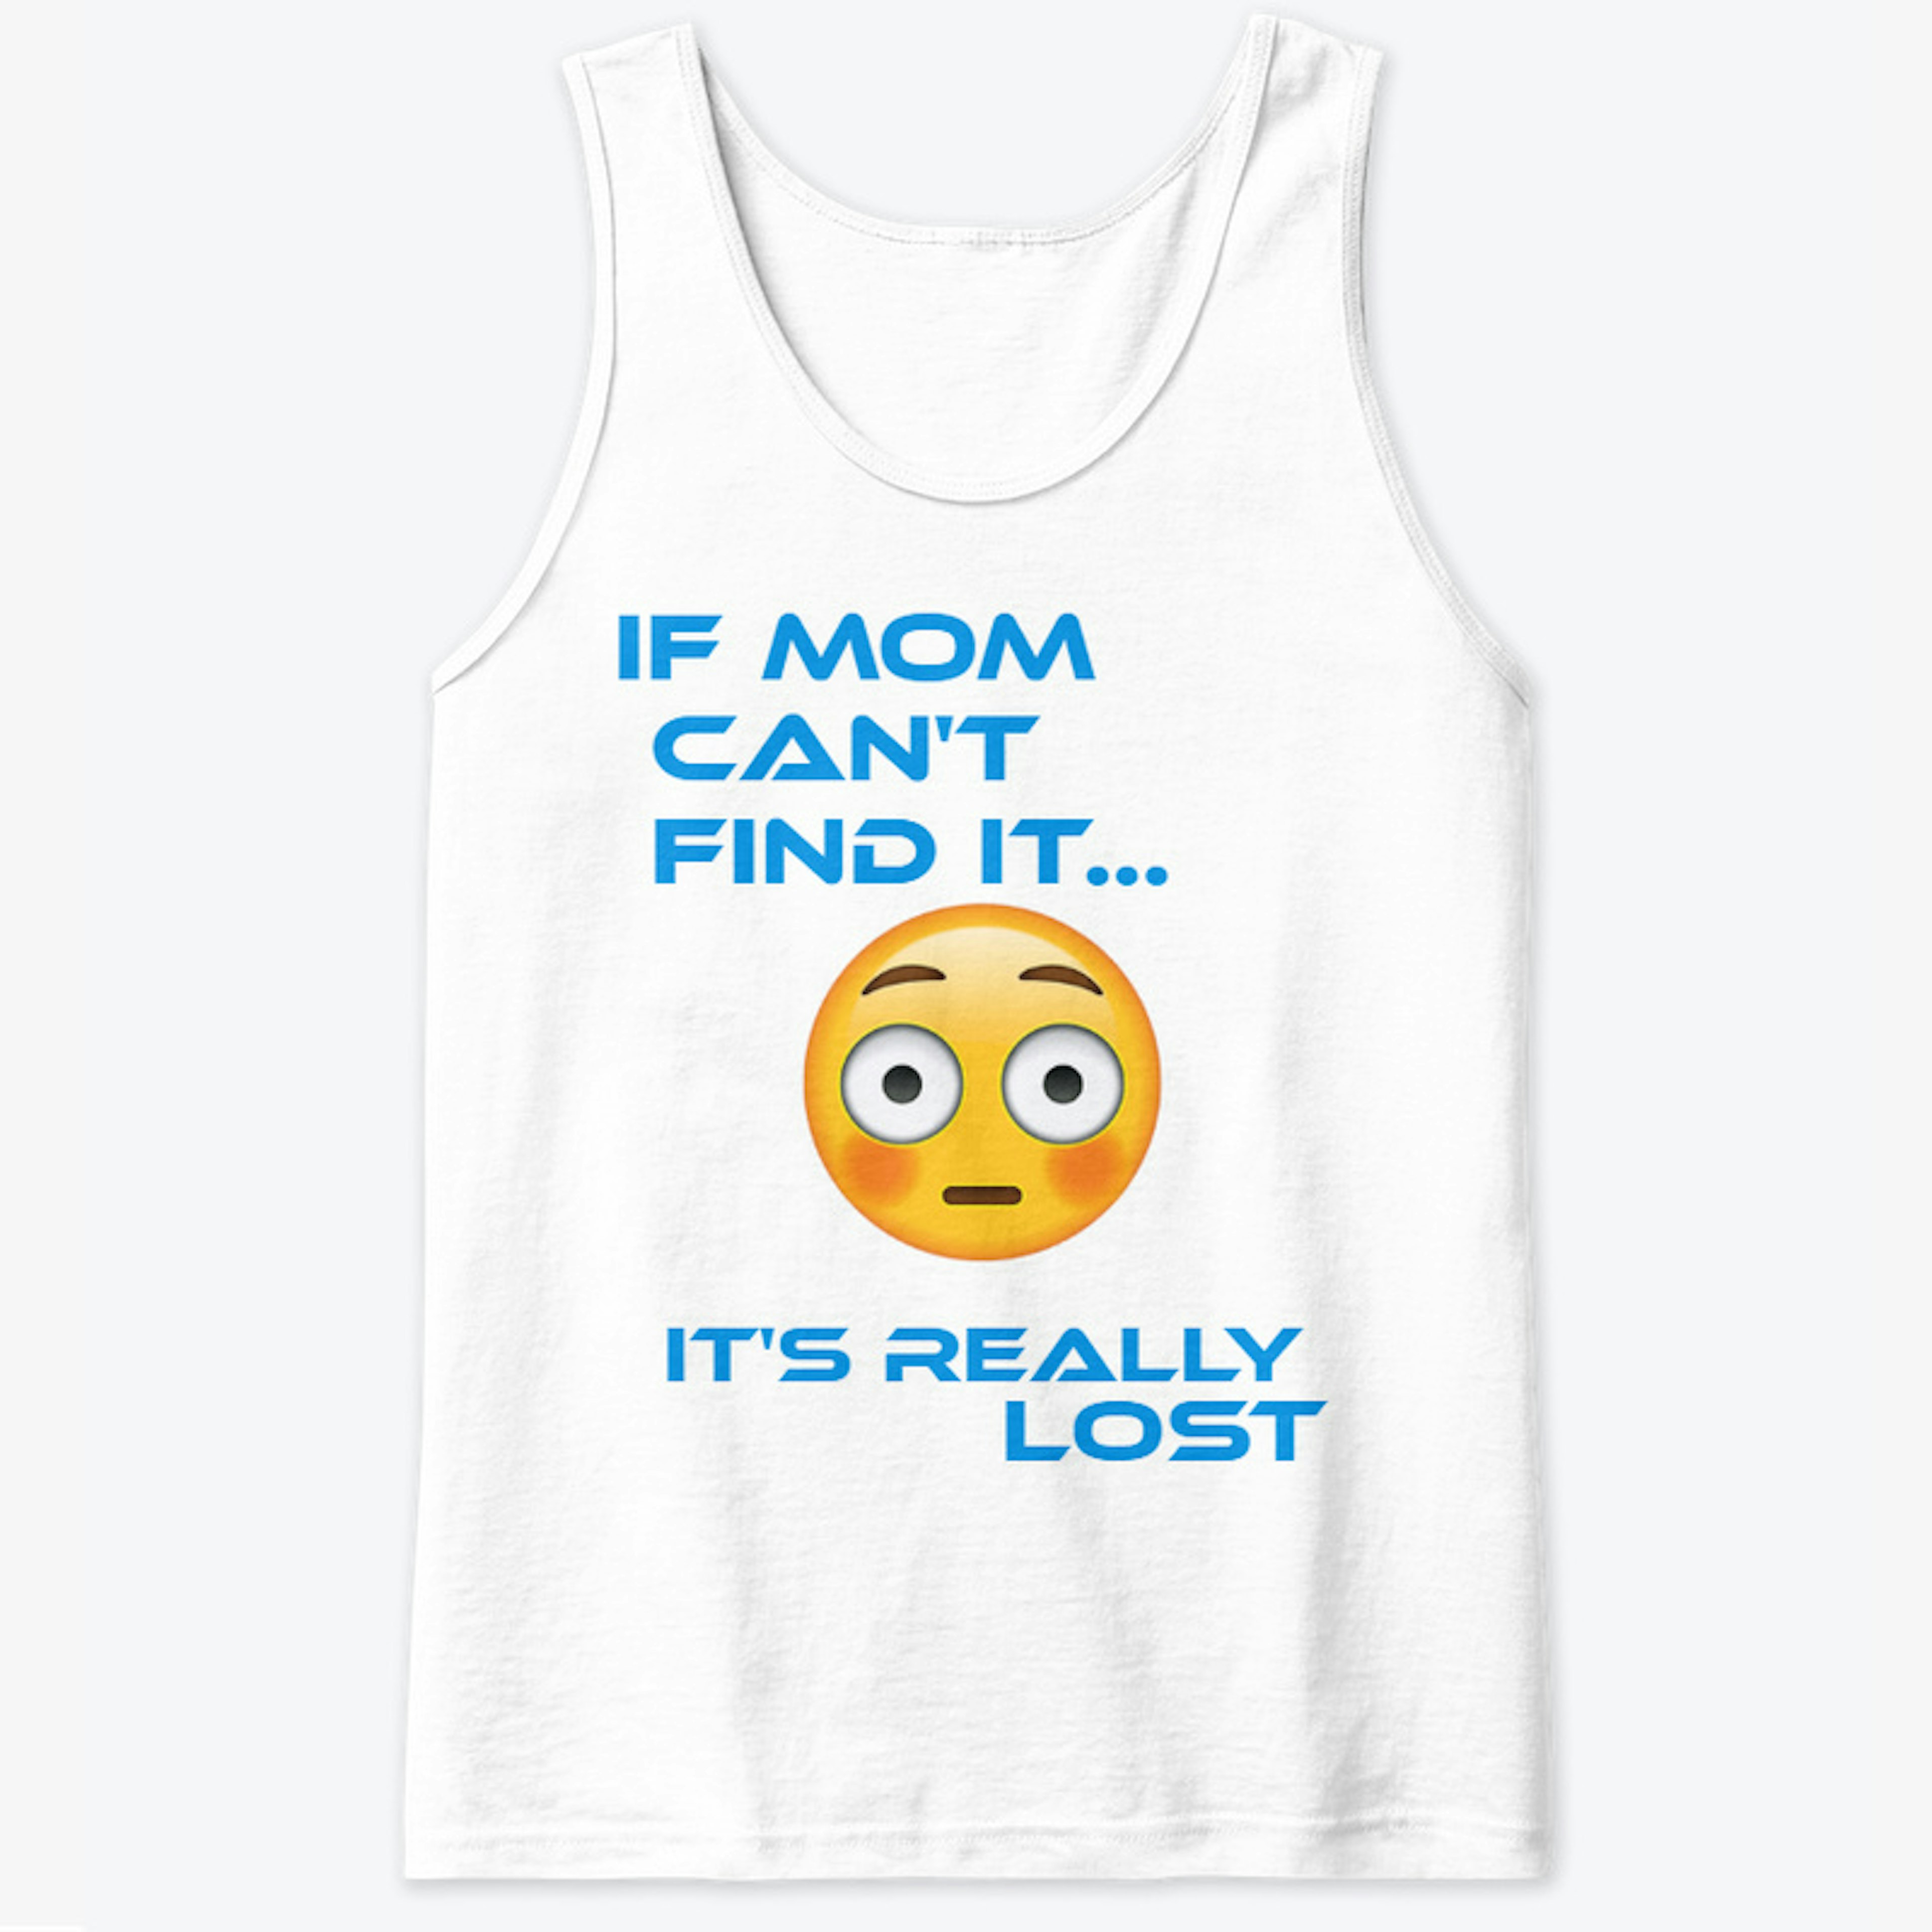 If Mom Can't Find It... It's Really Lost